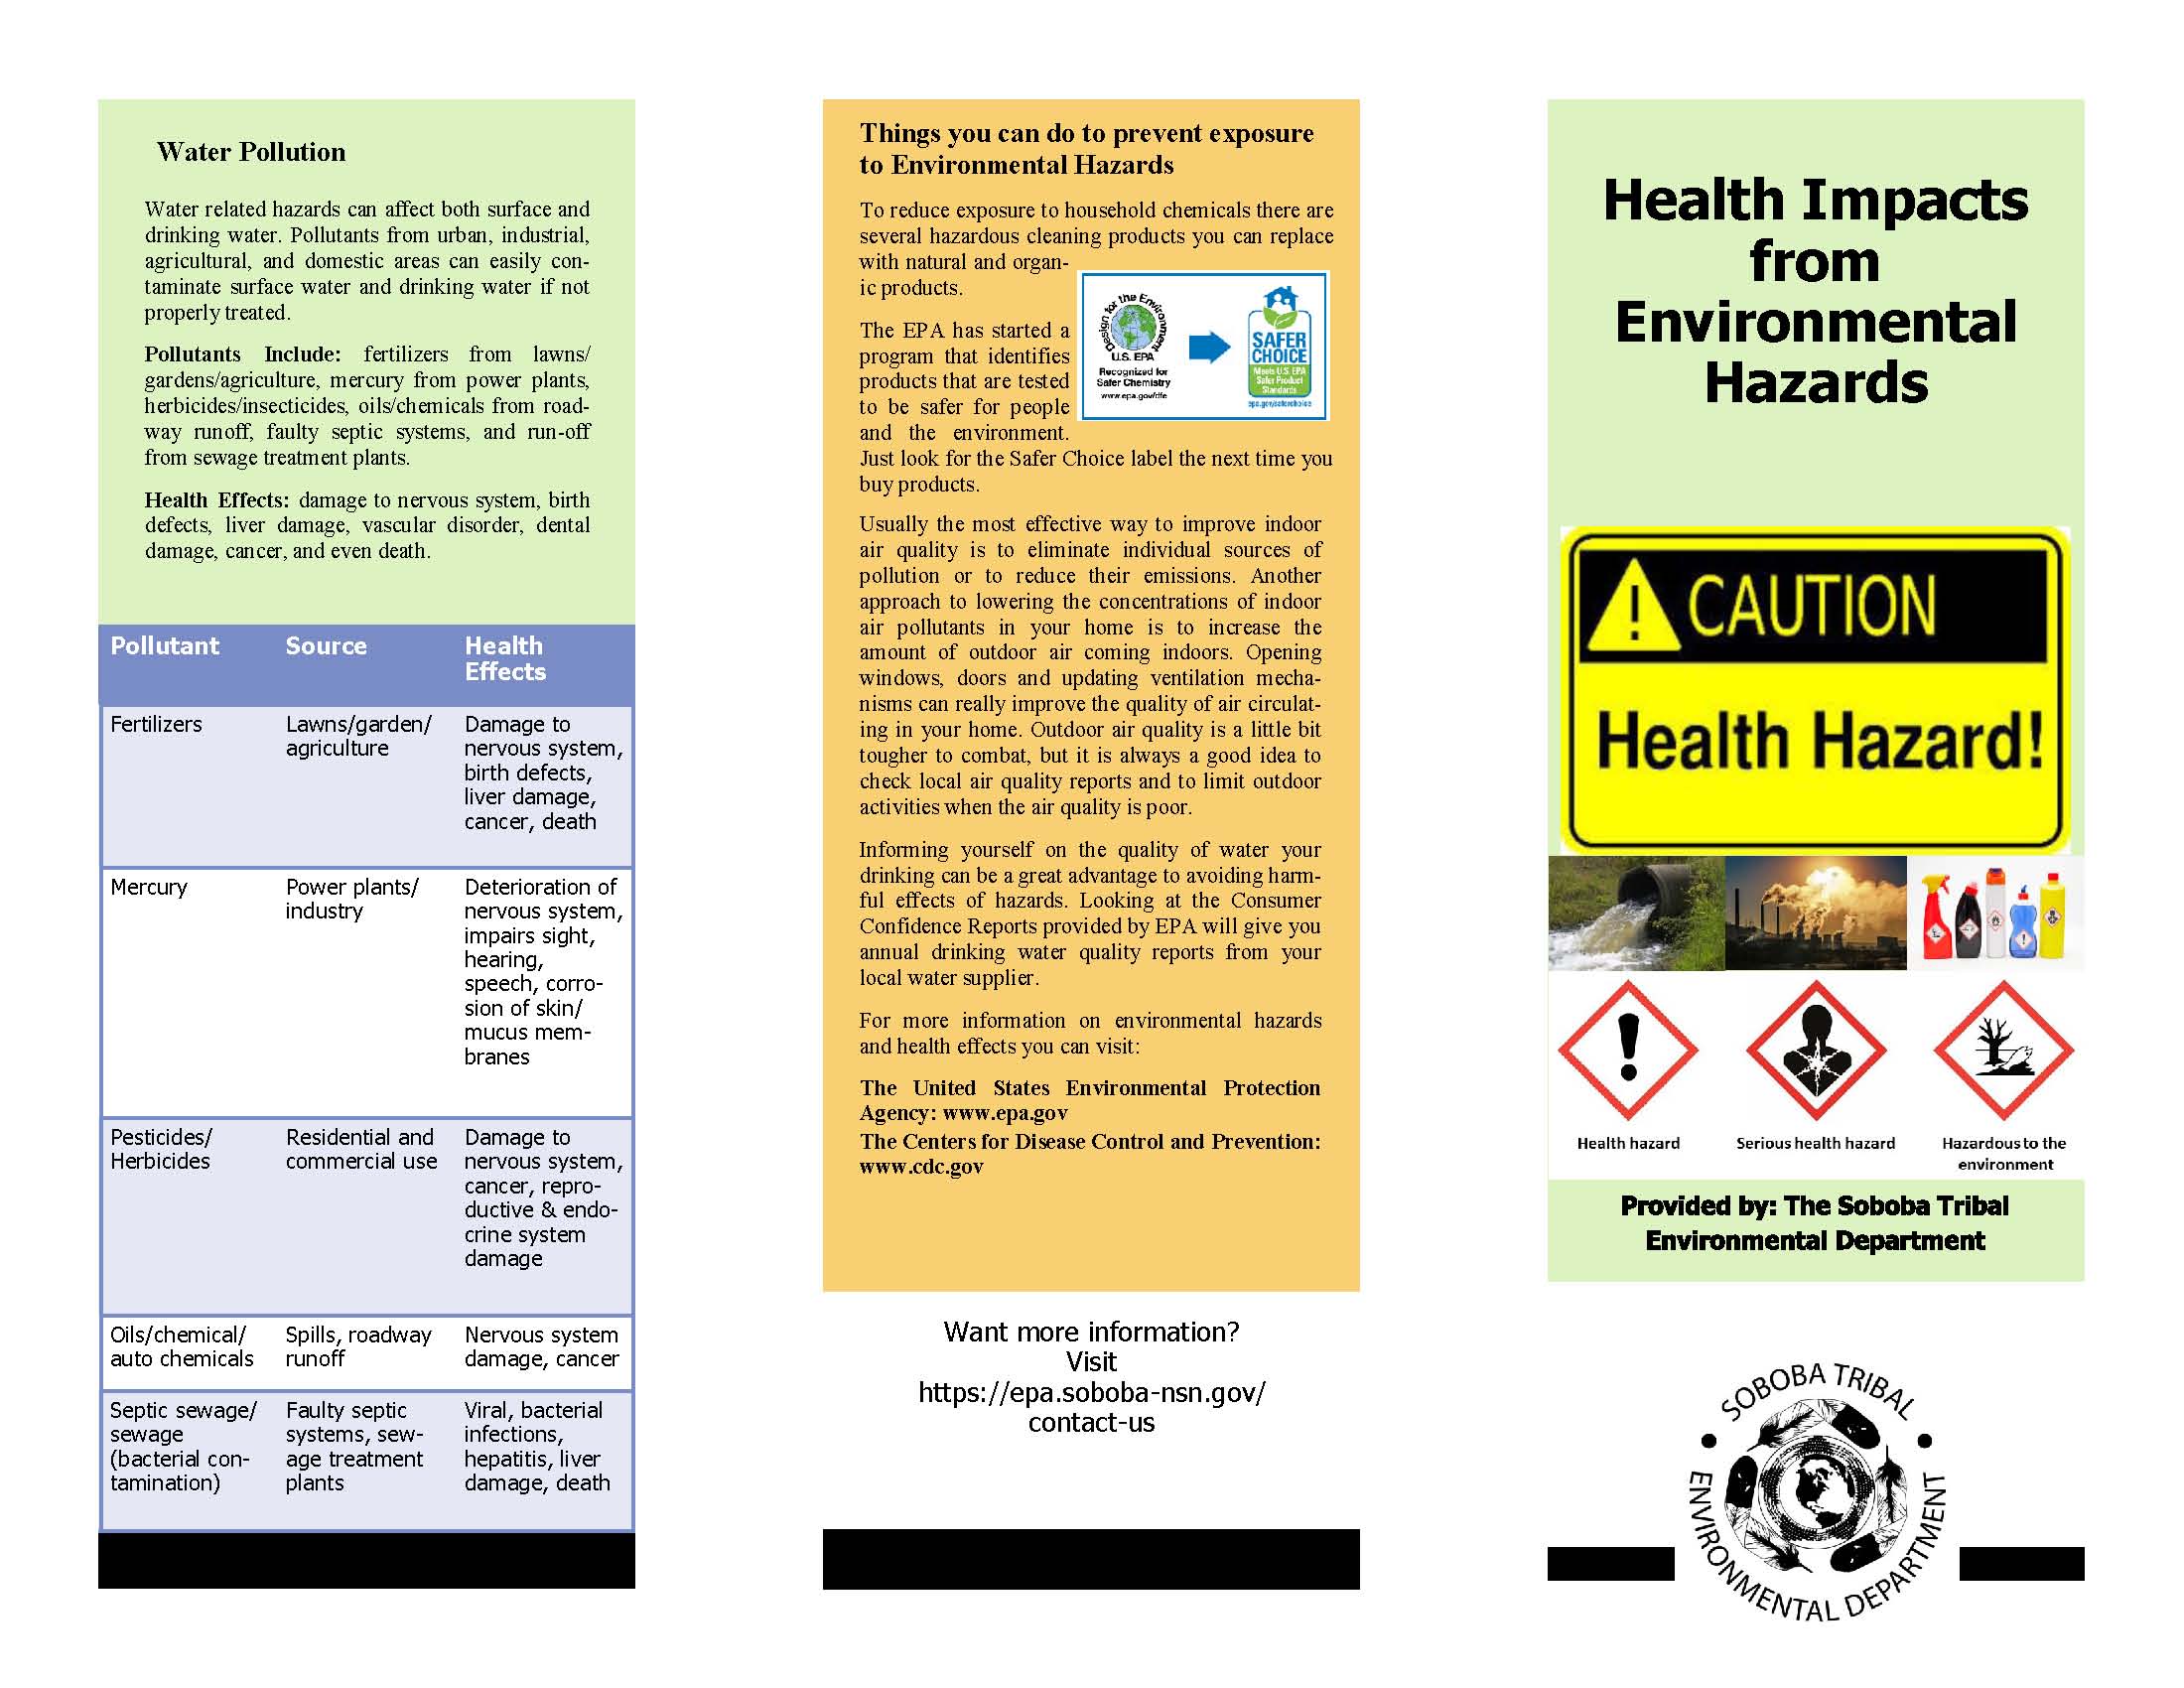 Health Impacts from Environmental Hazards